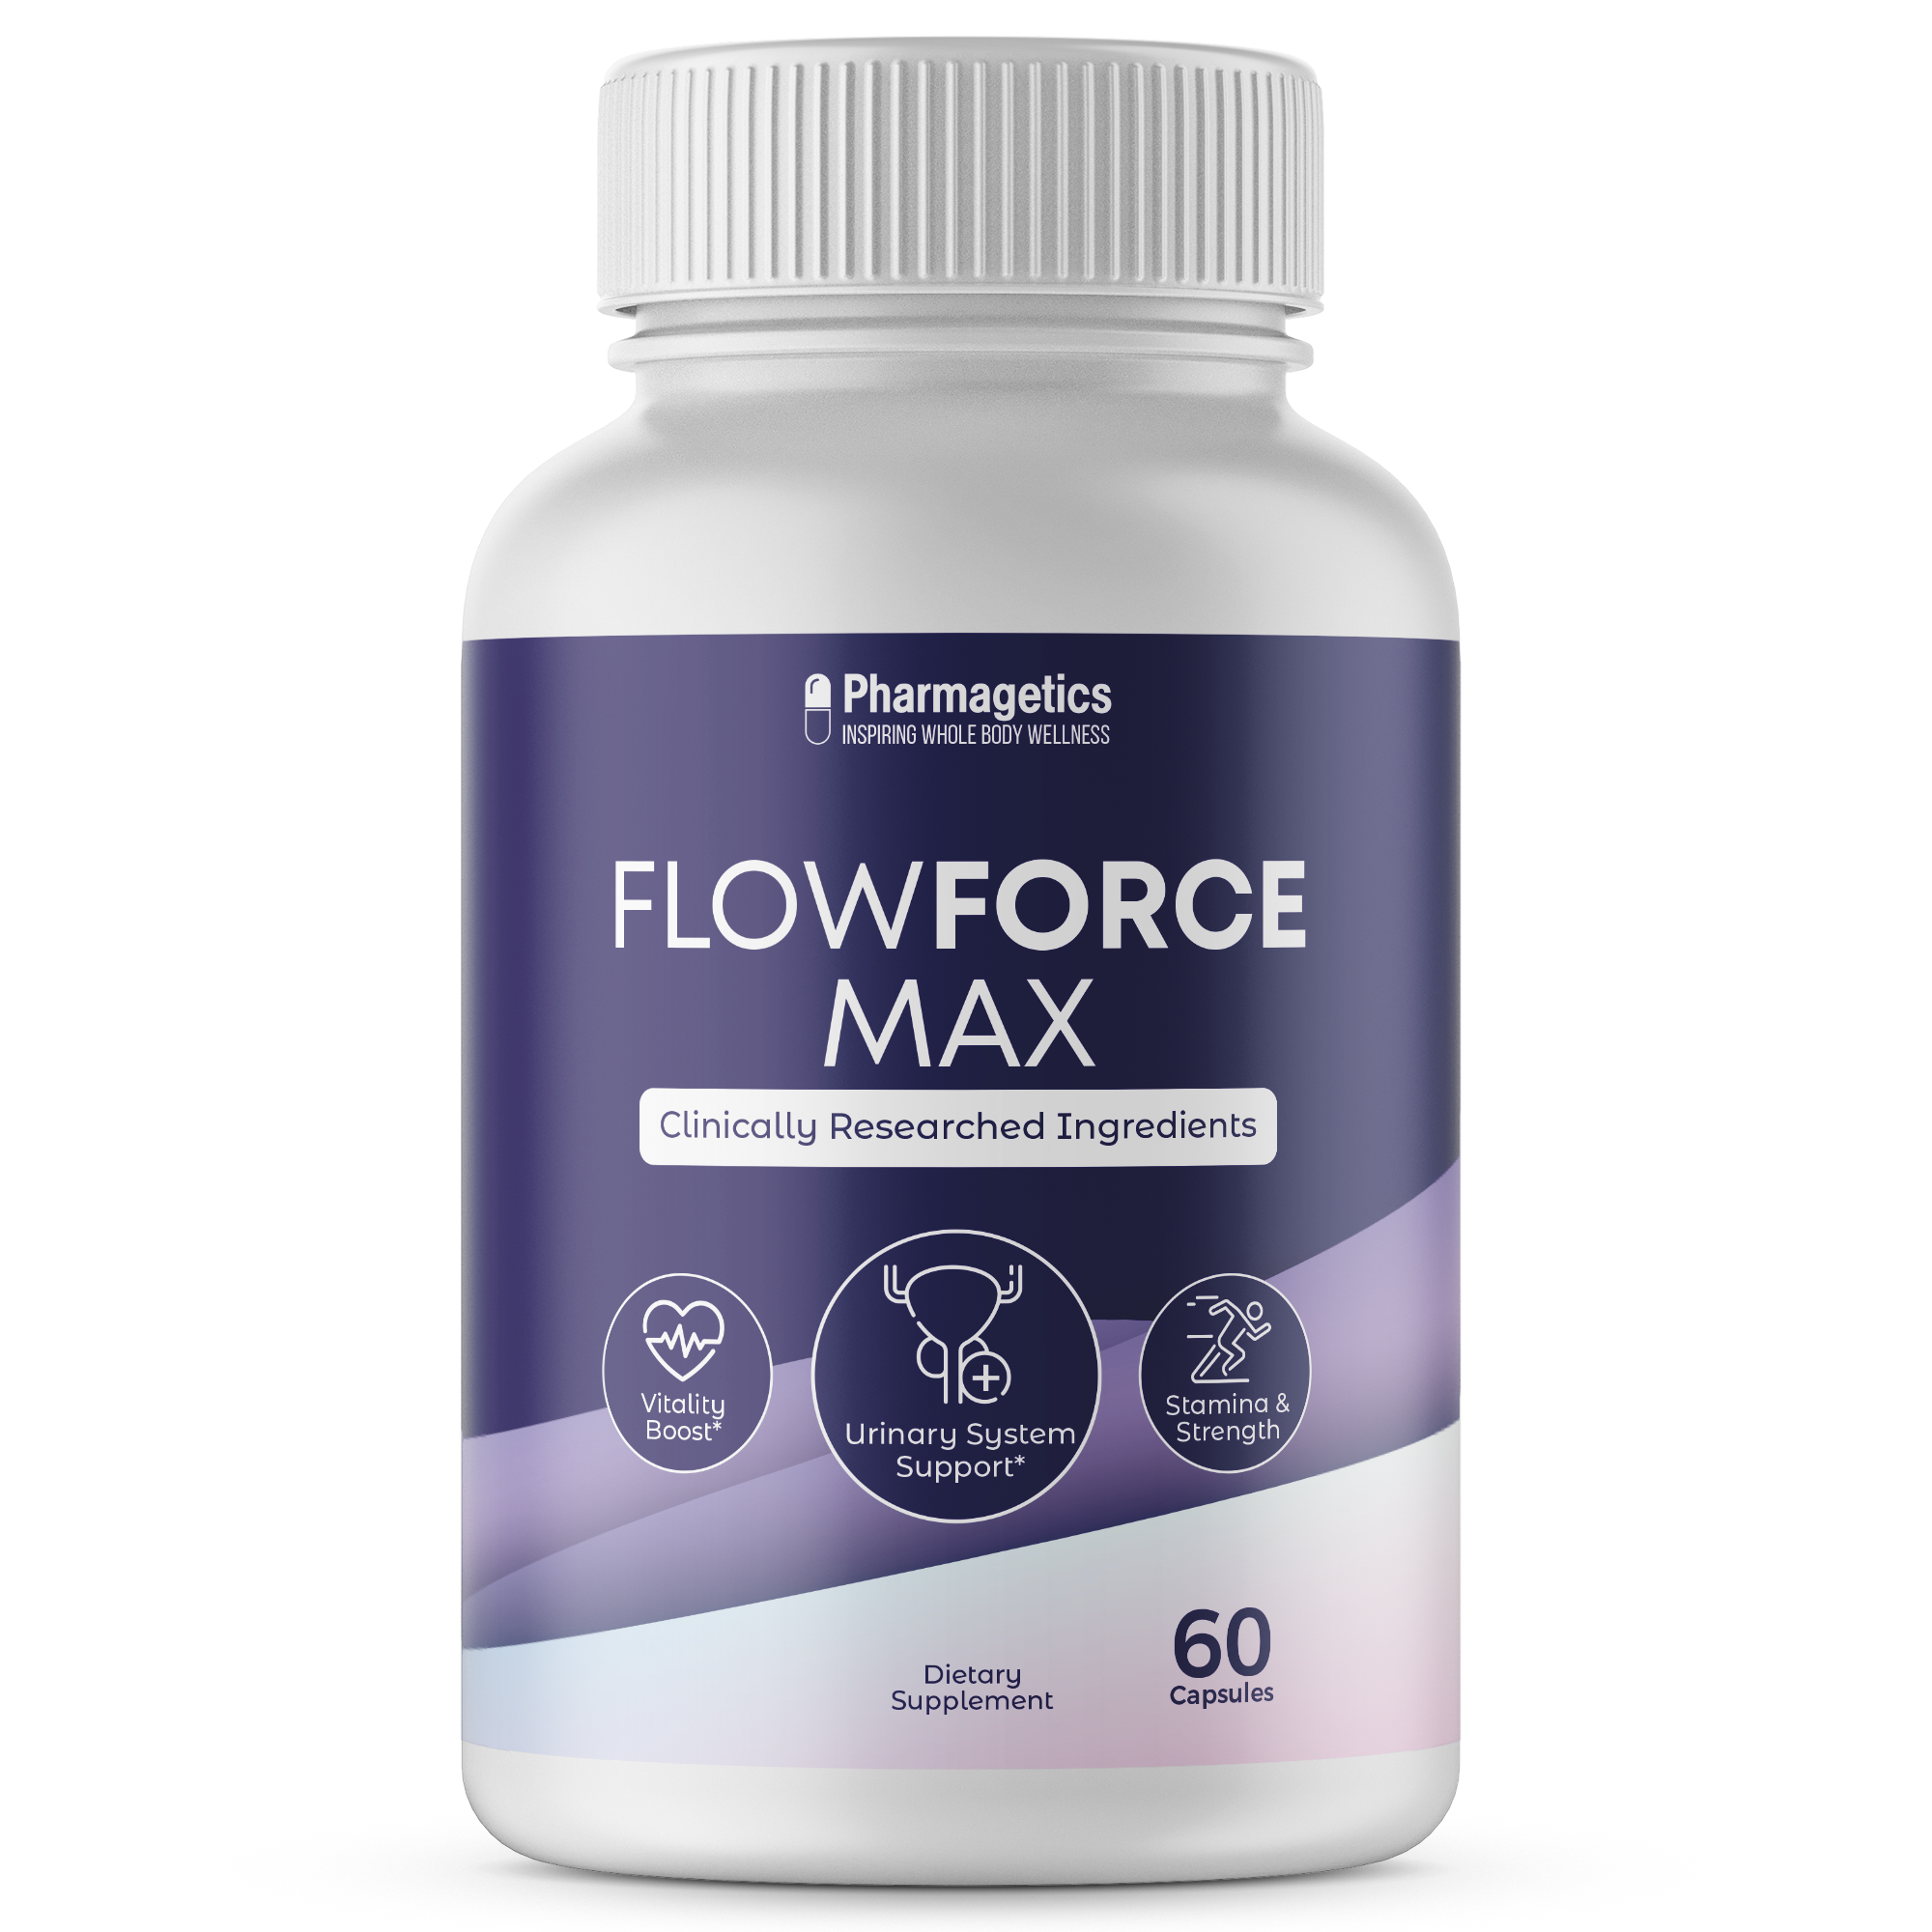 Flowforce Max Prostate Support Supplement Flow Force Max - 60 capsules